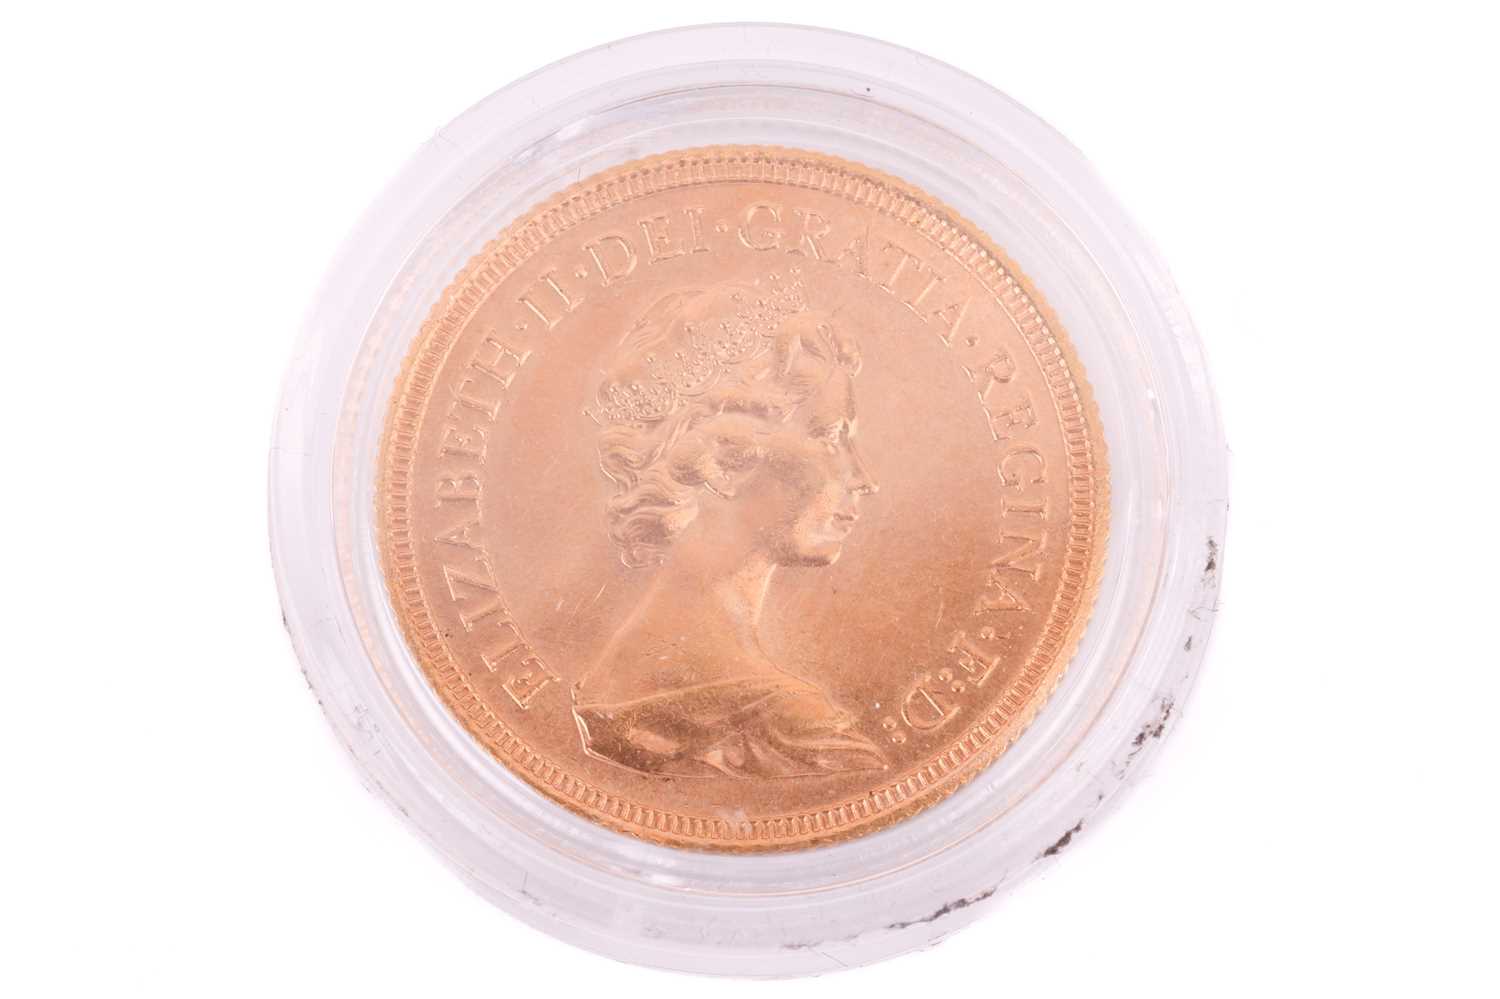 A 1976 Elizabeth II Full-Sovereign with a plastic case, circulated. - Image 2 of 2